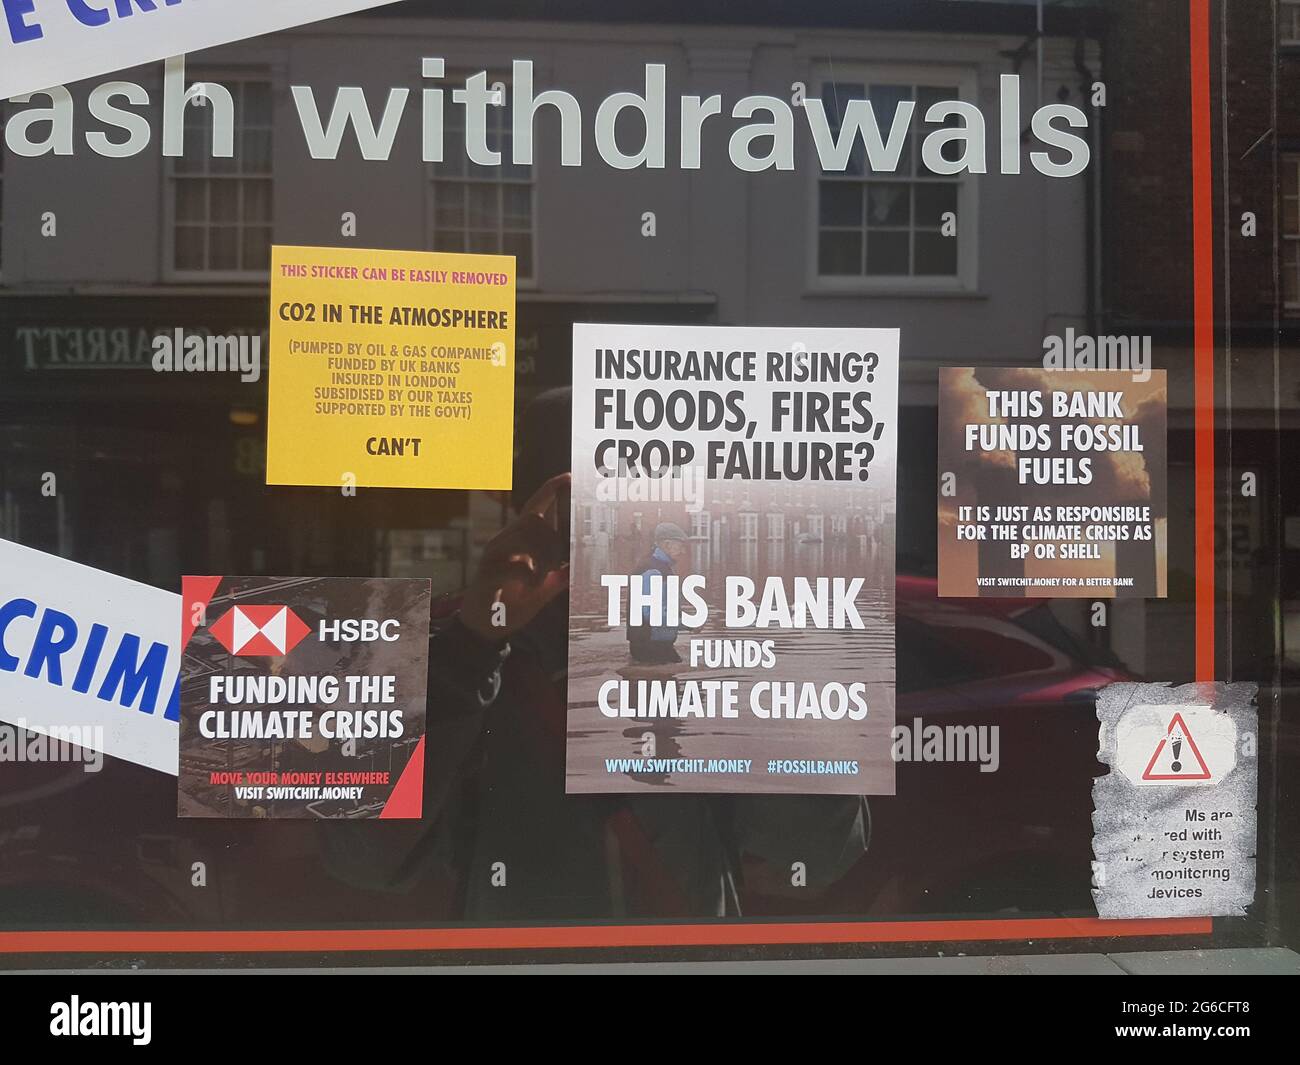 Woodbridge, Suffolk, UK July 05 2021: Extinction rebellion poster that has been put up on the walls of a HSBC bank claiming they fund climate crisis Stock Photo